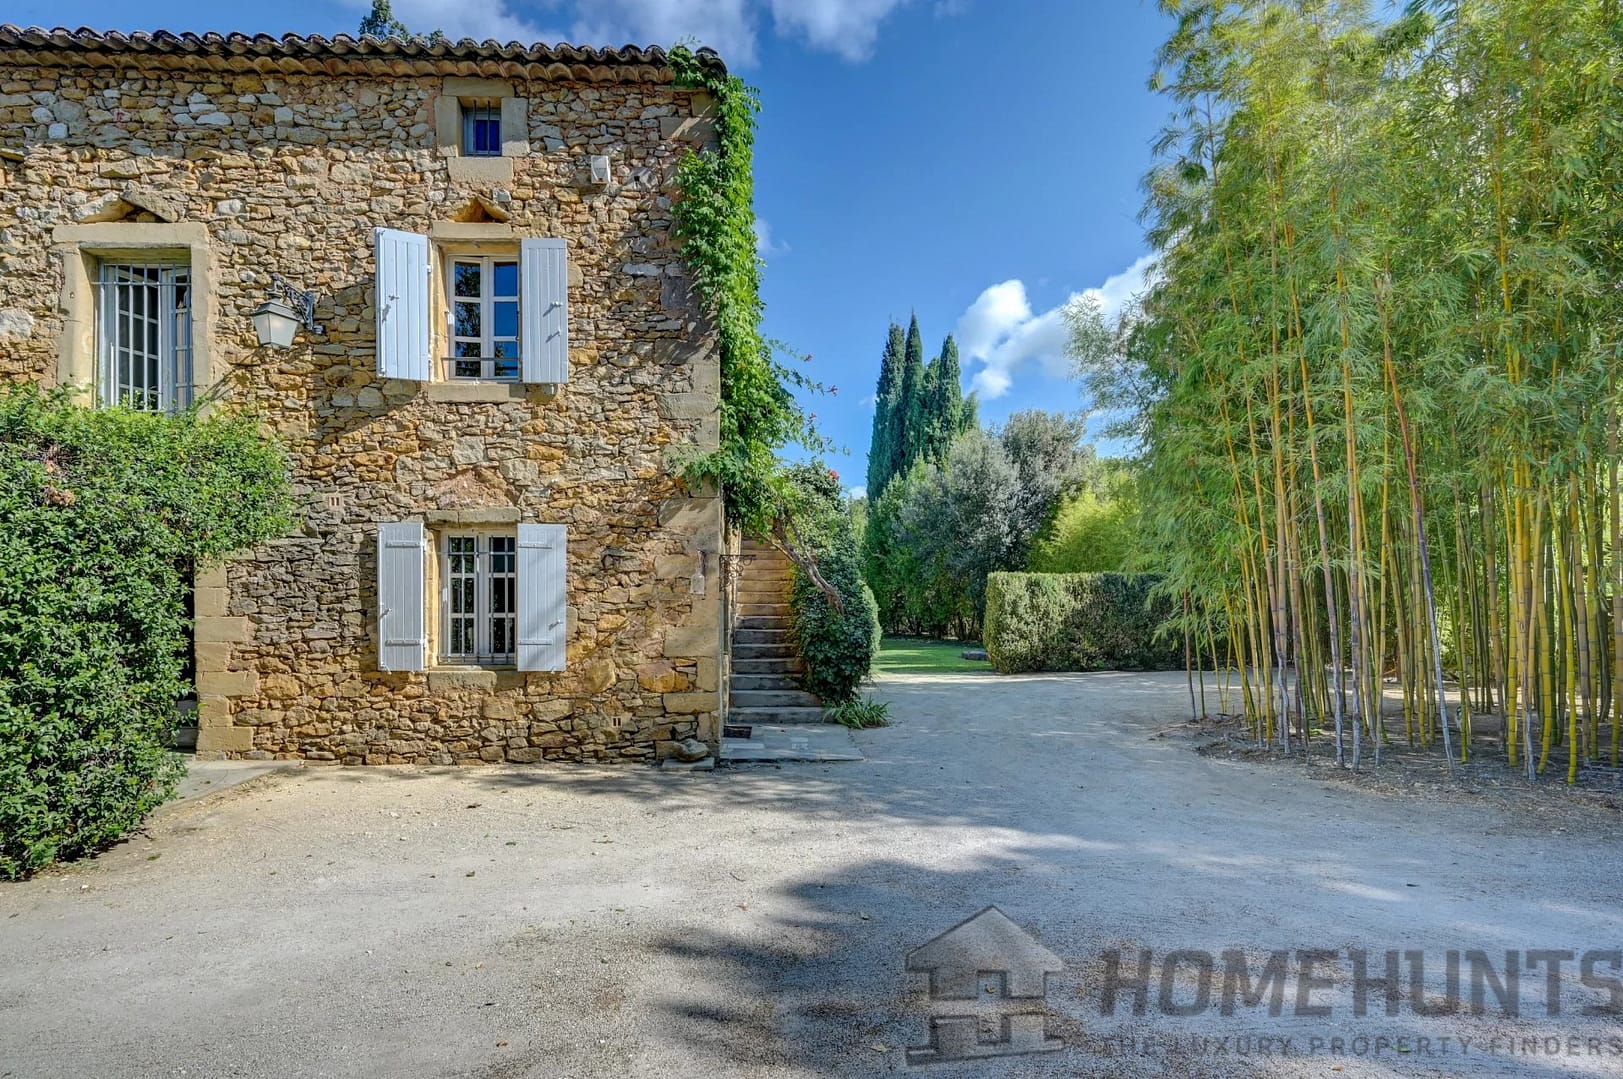 Villa/House For Sale in Uzes 2